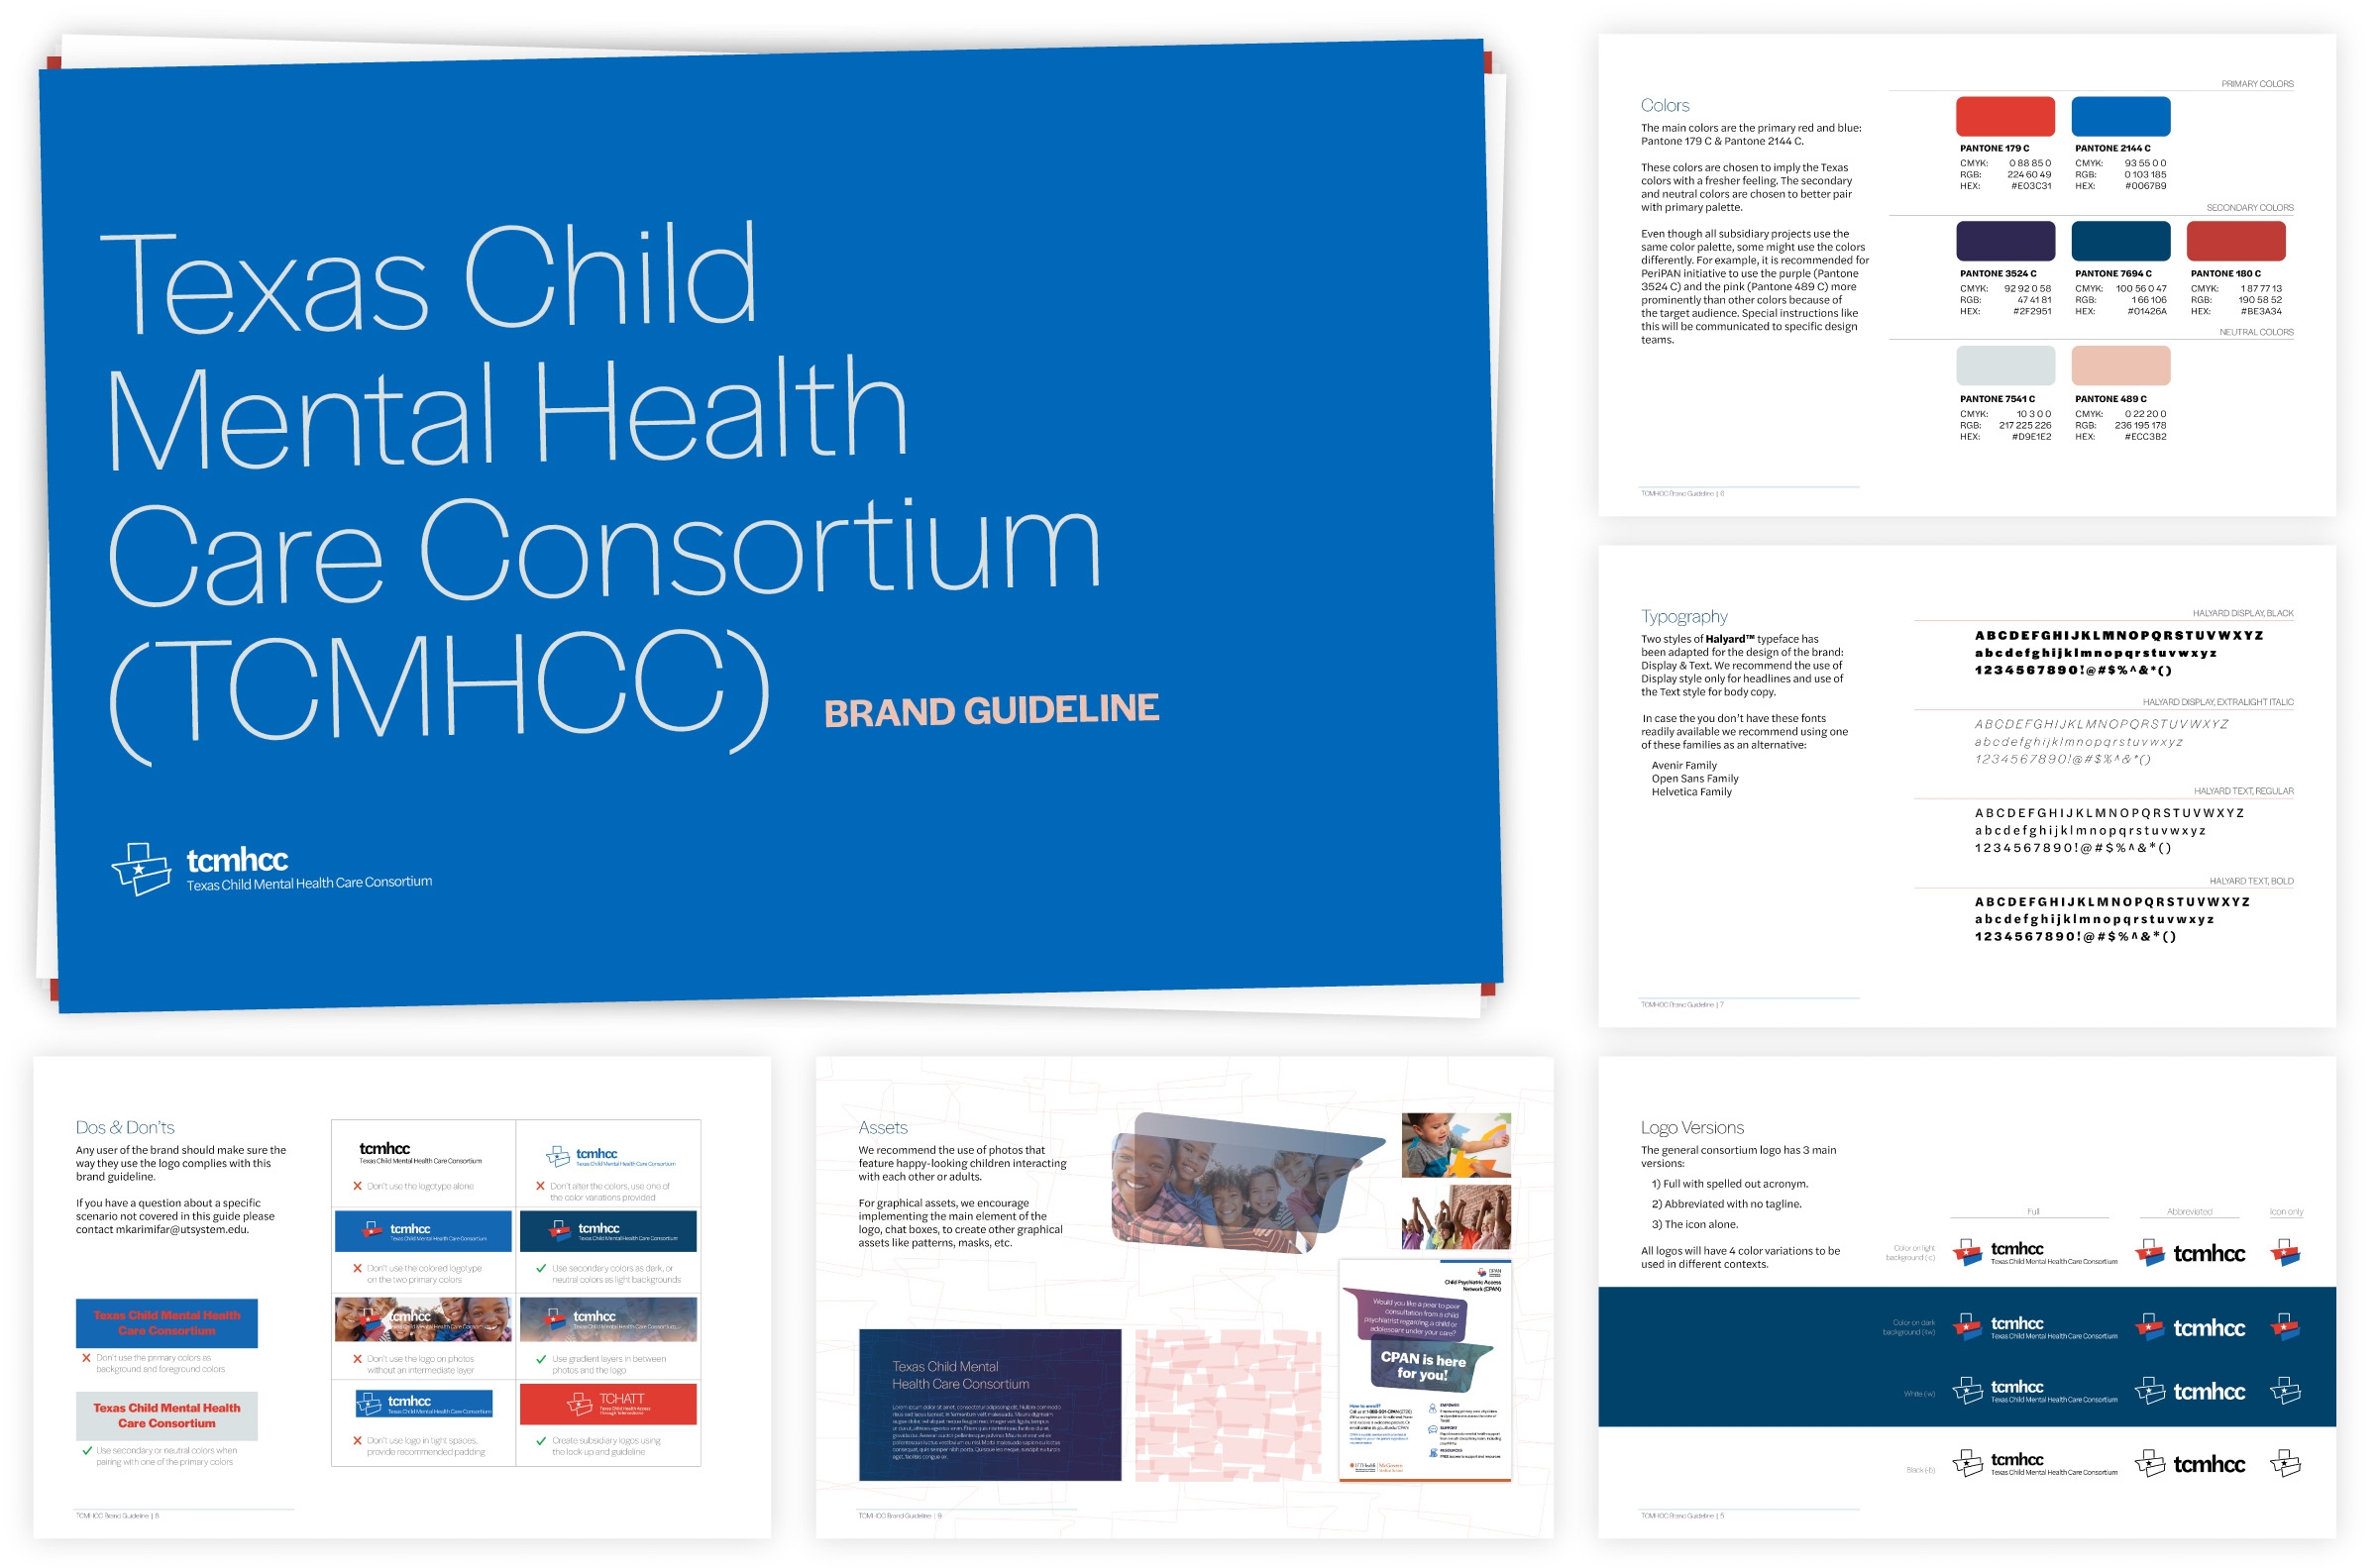 Some pages of TCMHCC brand guideline booklet